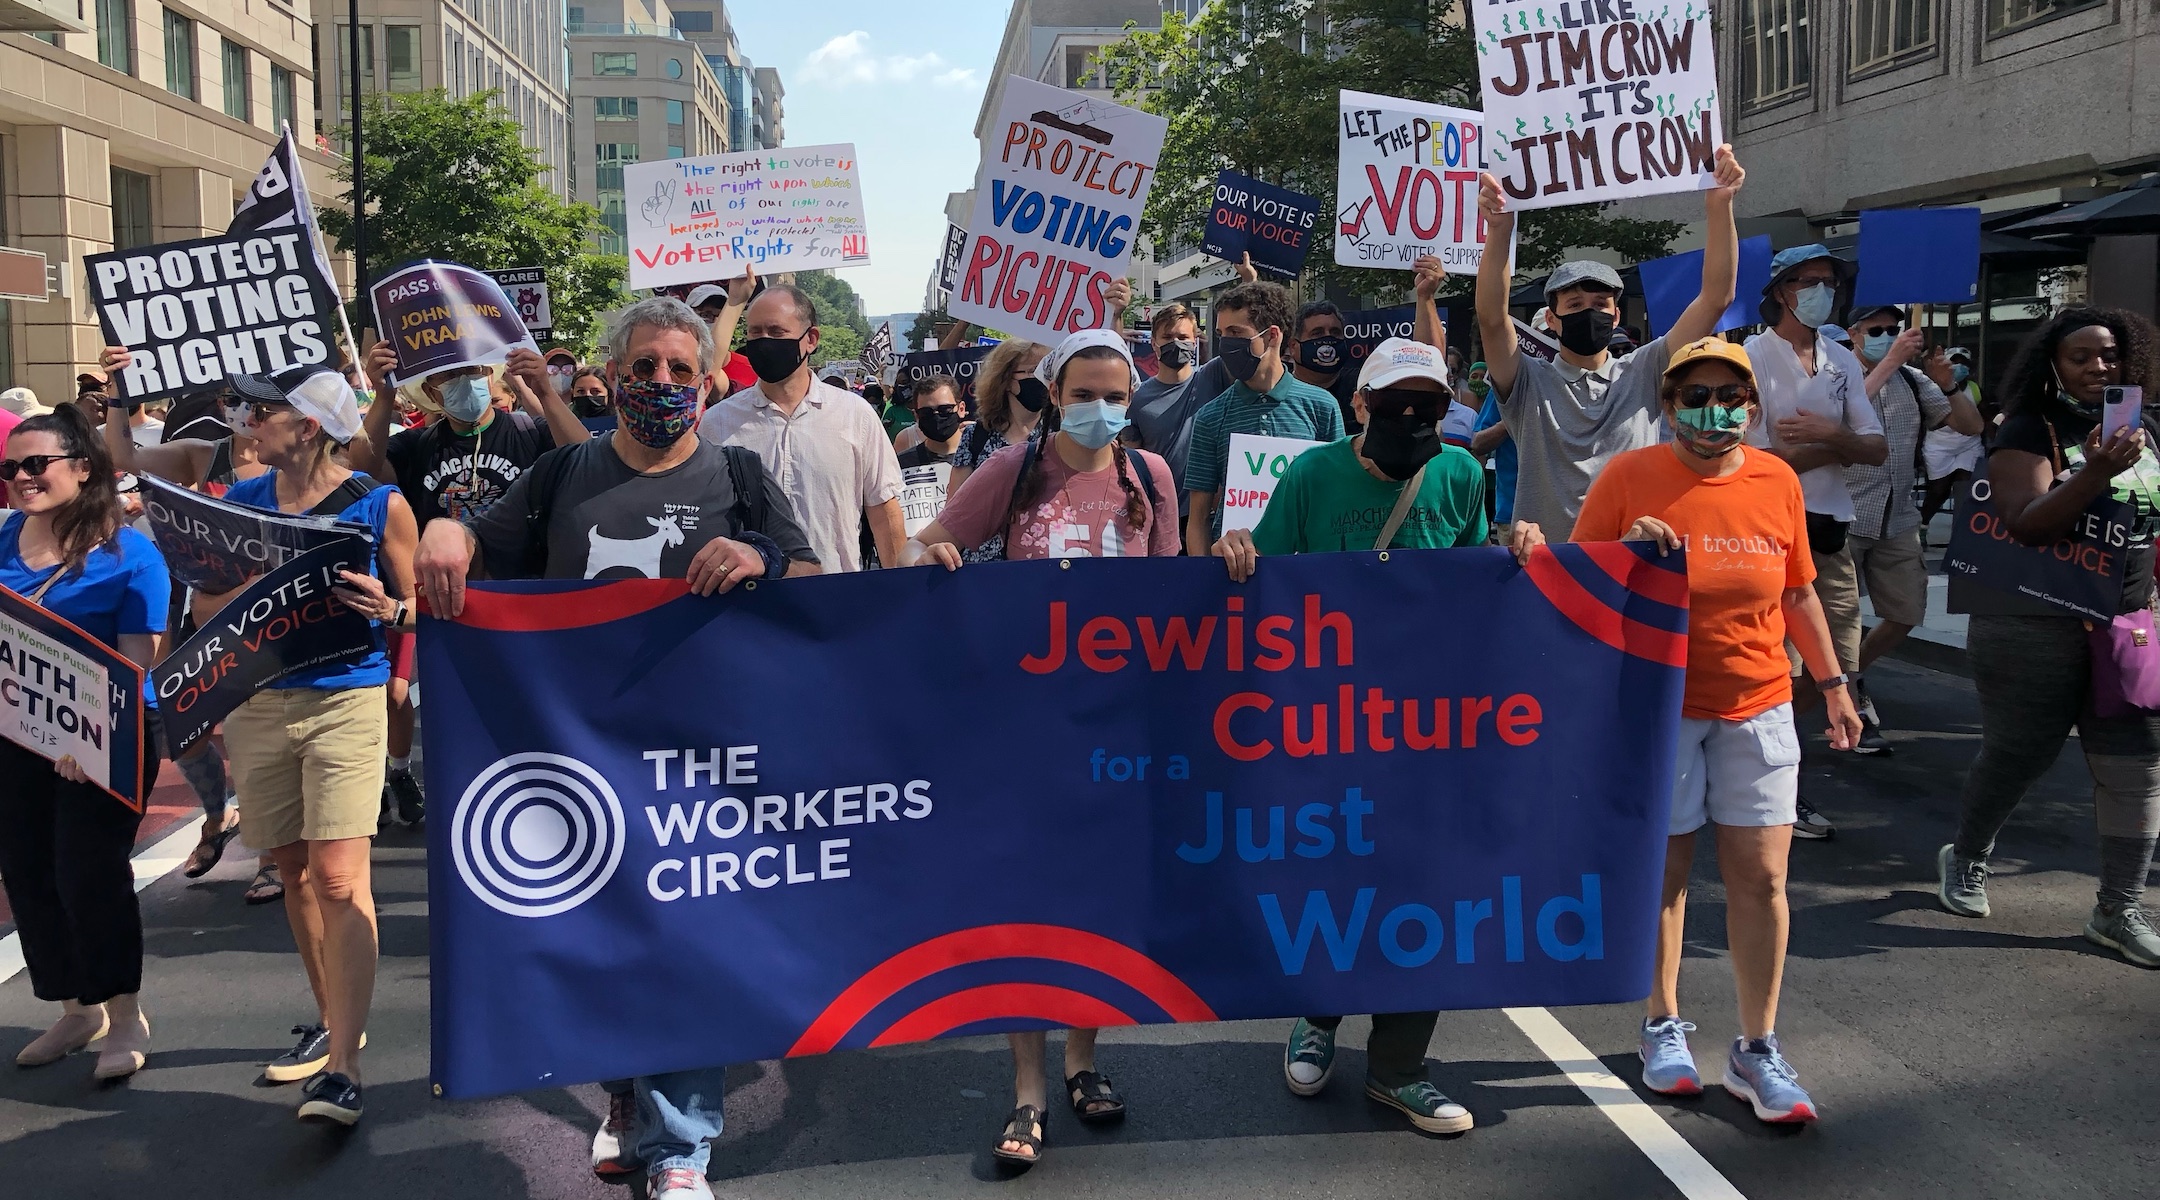 Members of The Workers Circle at a pro-democracy march. The group has announced it will resign from the Conference of Presidents of Major American Jewish Organizations due to what it described as the coalition’s inaction on protecting democracy. (Courtesy of The Workers Circle)